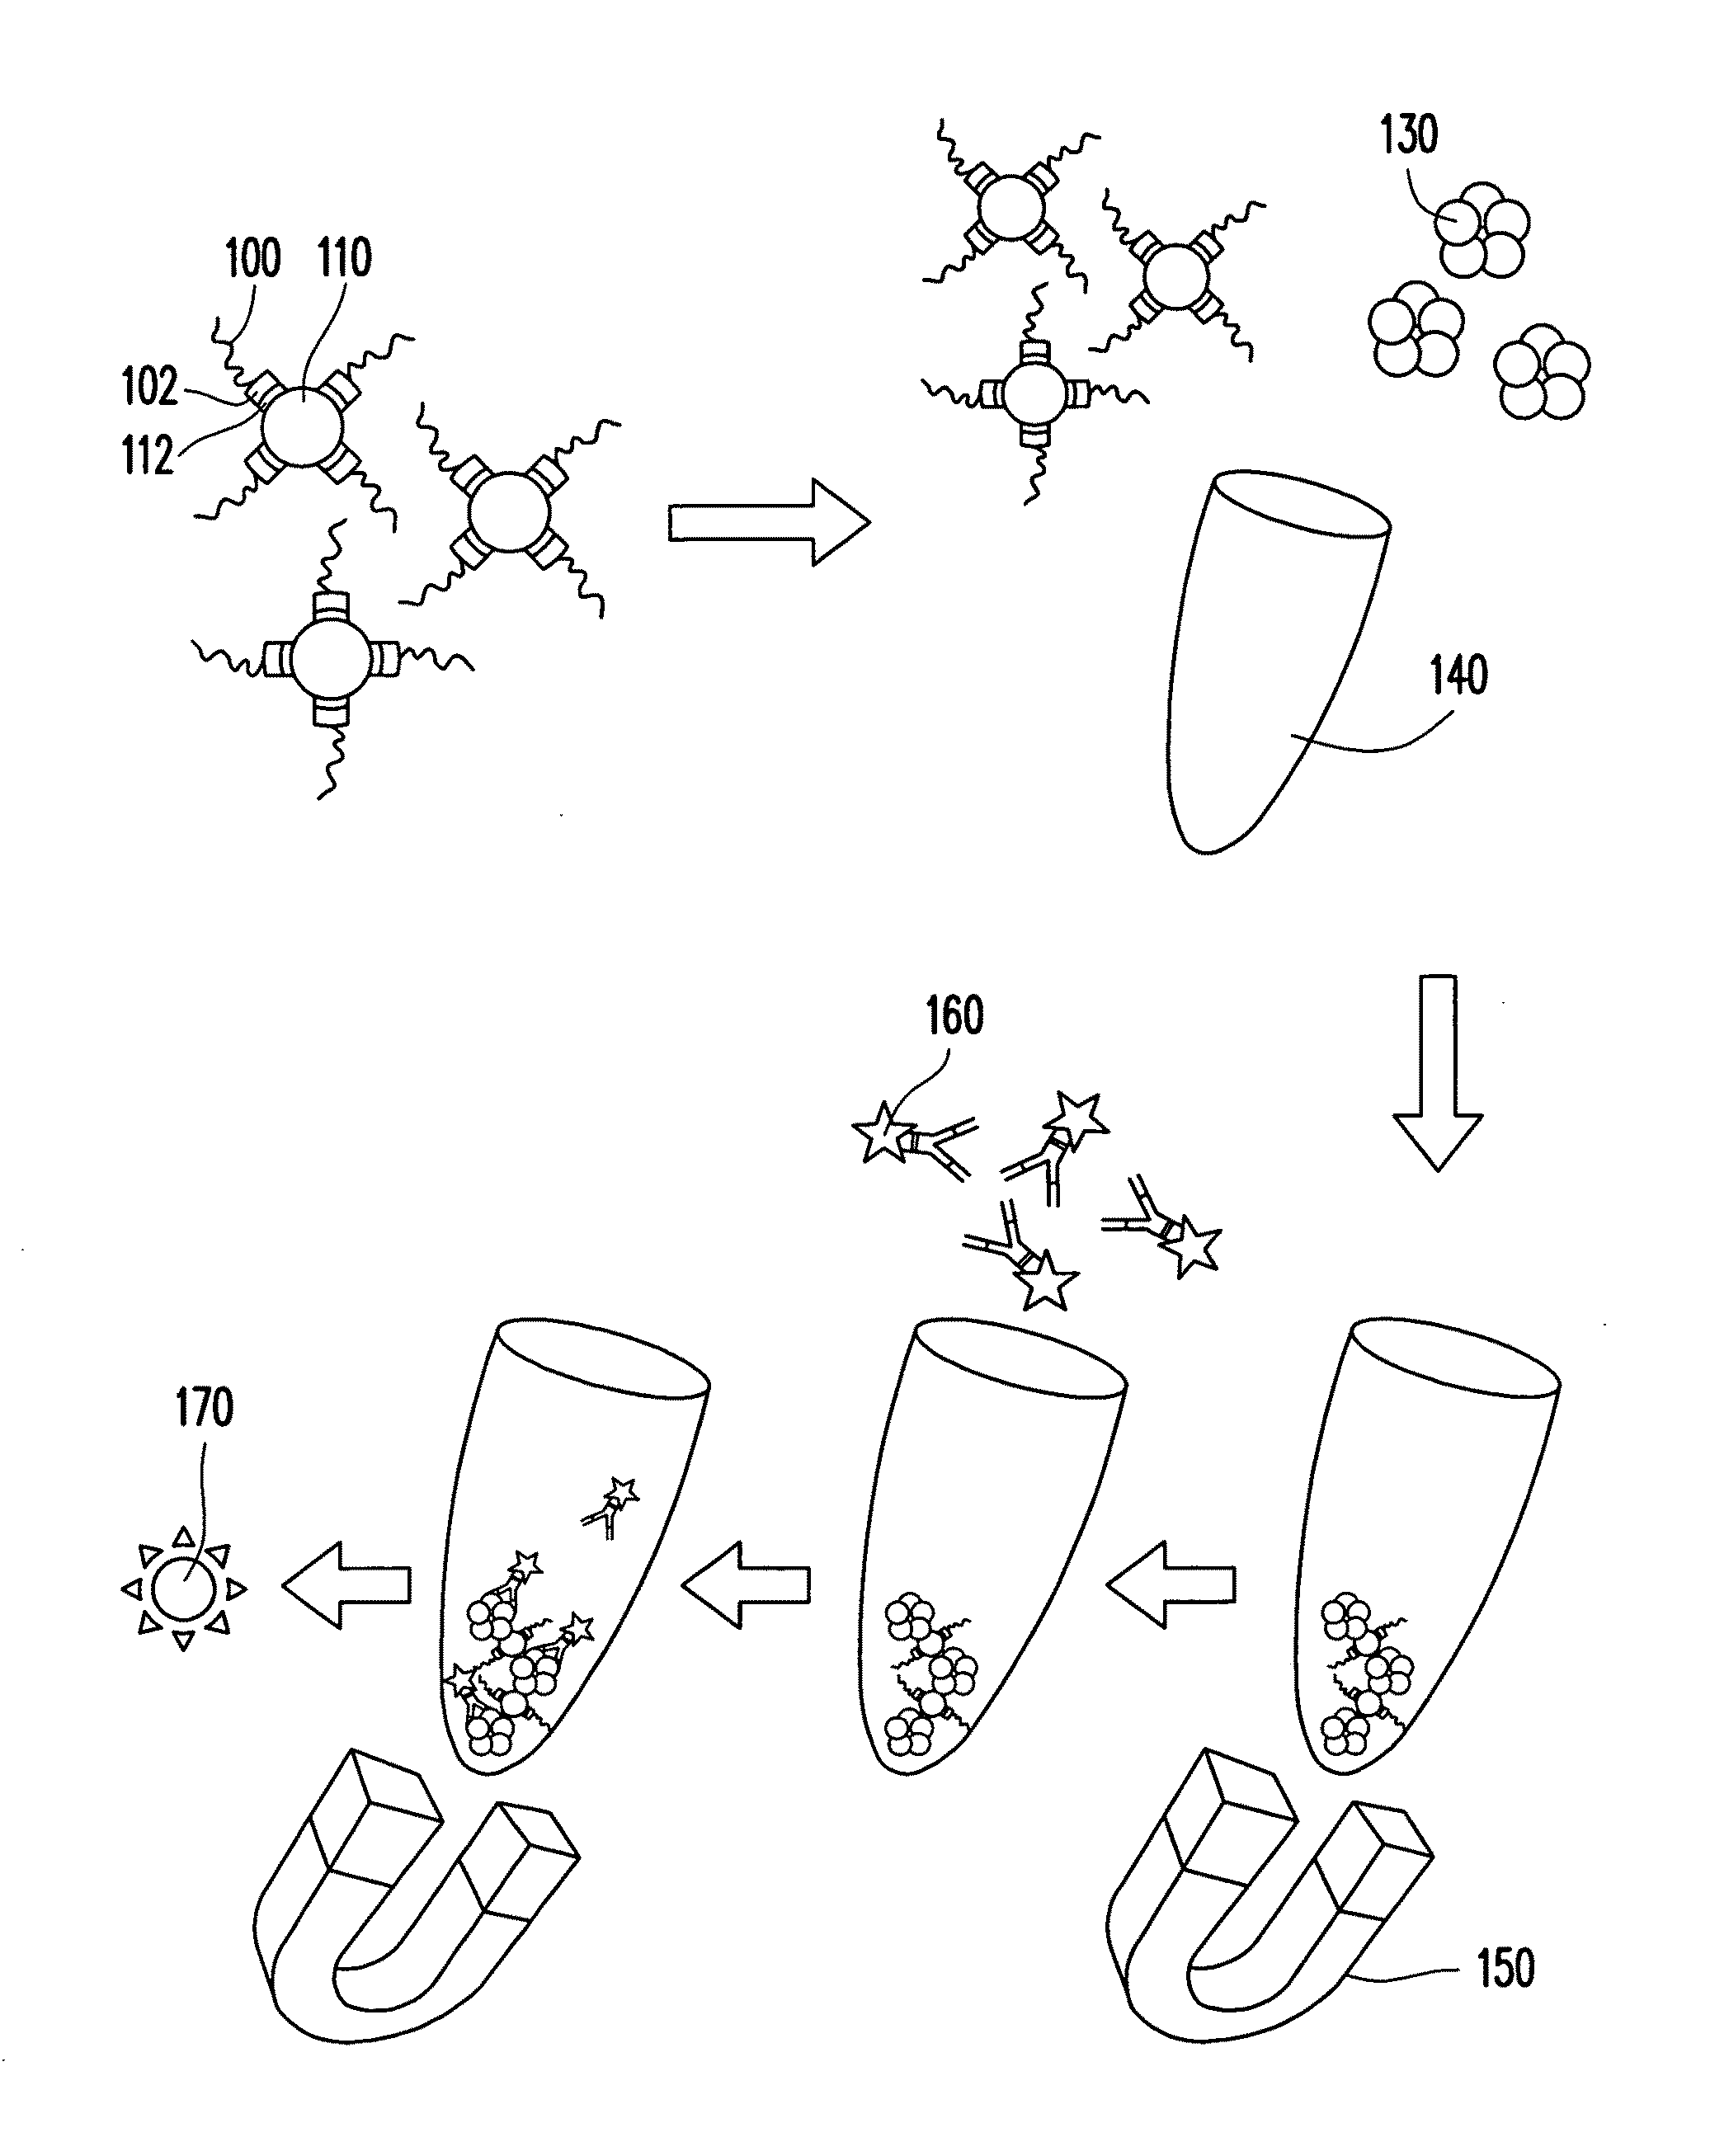 Aptamer and detection method for C-reactive protein